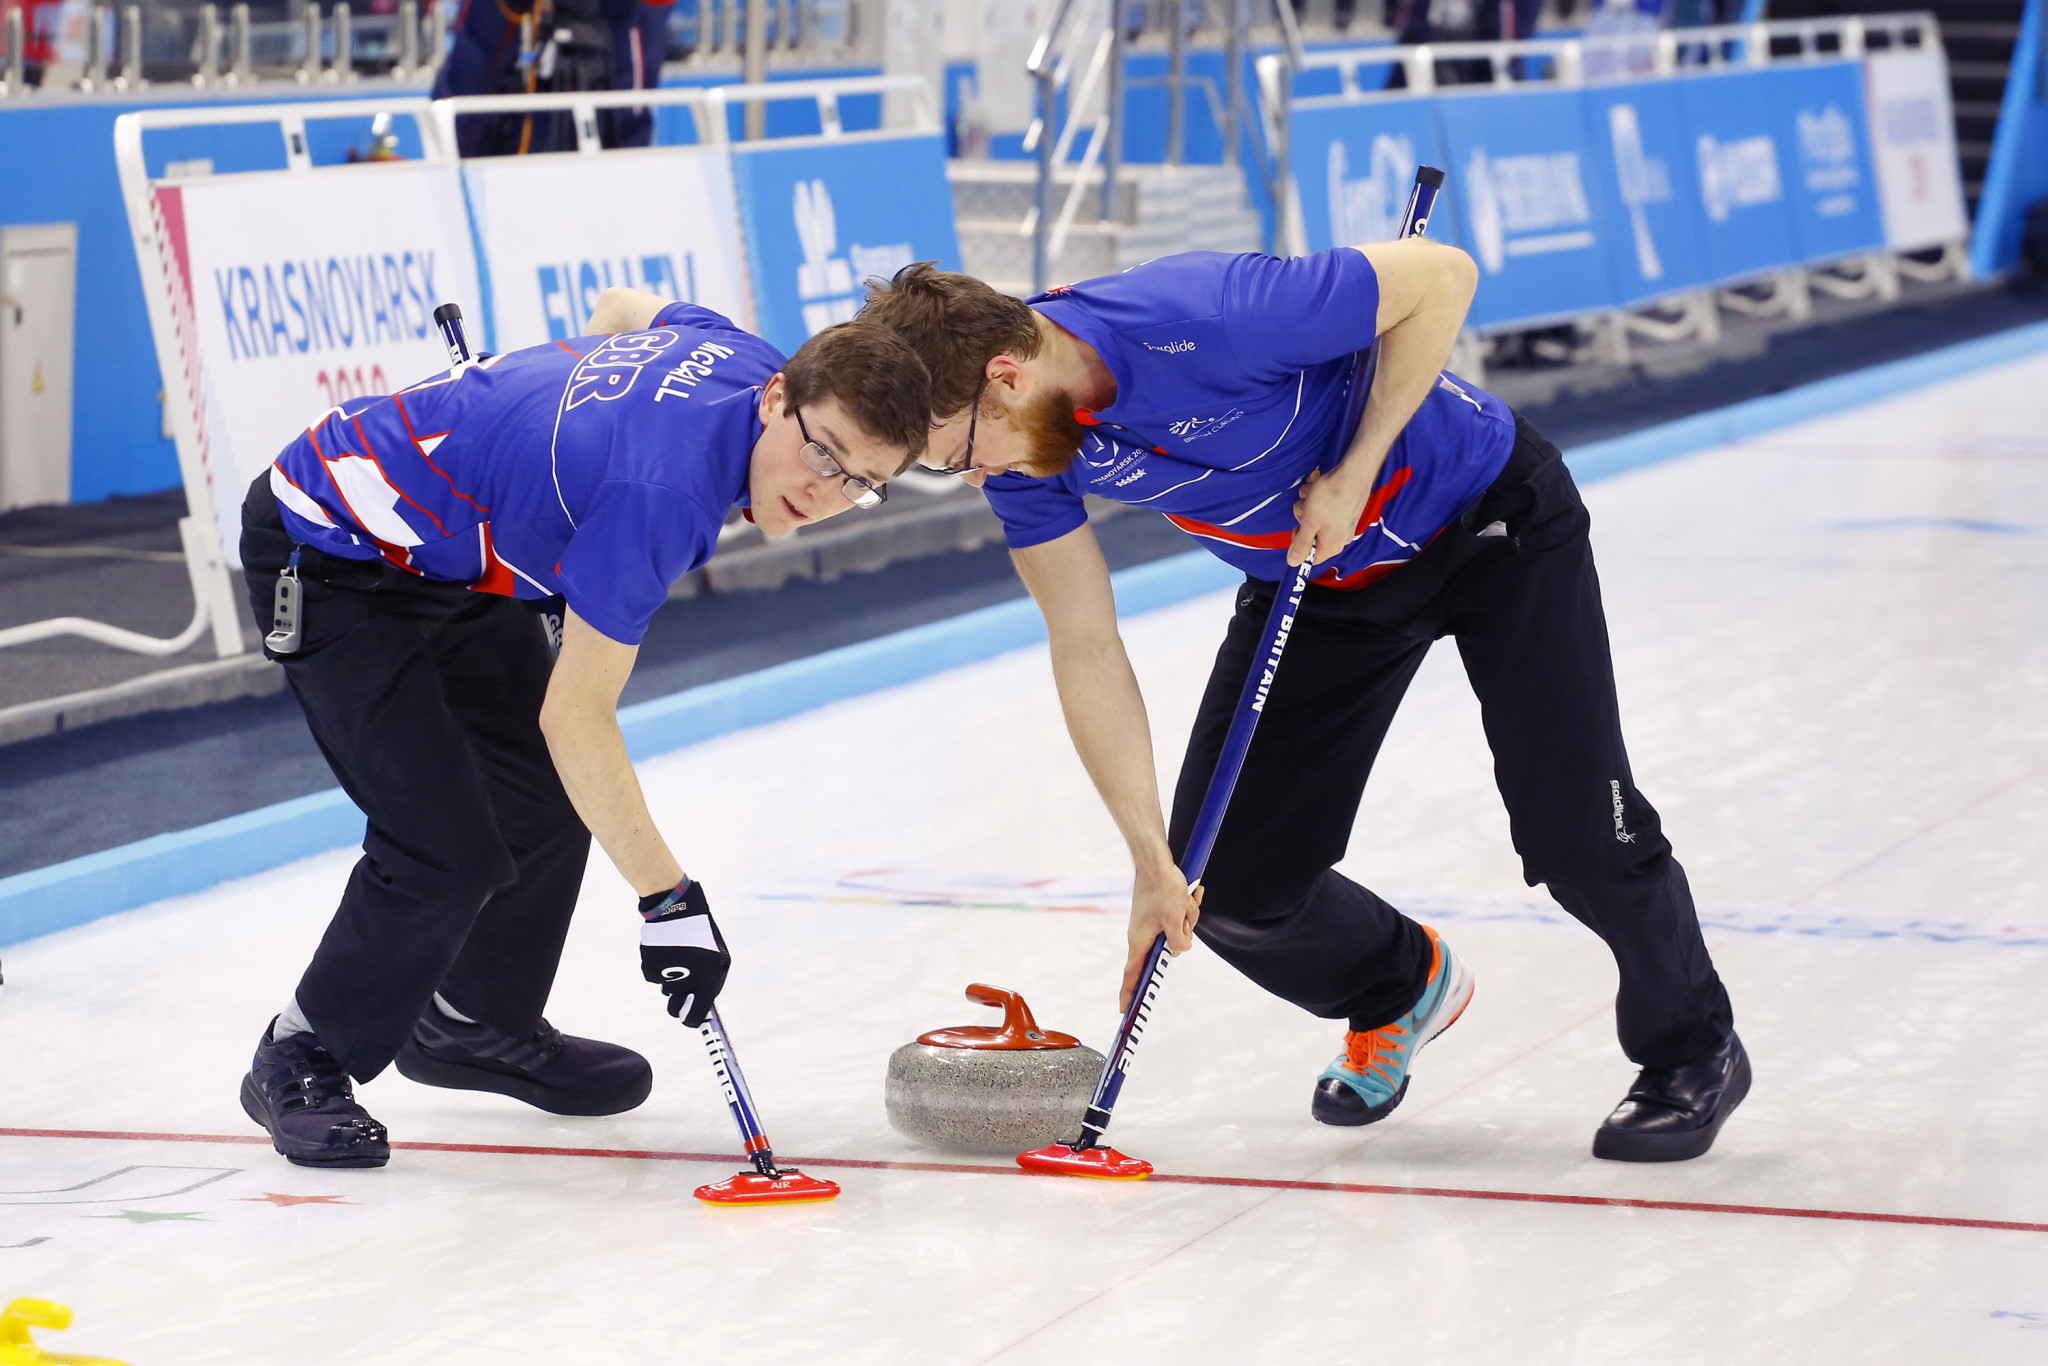 Britain's curling team topped the standings in the men's competition and progressed straight to the semi-finals ©Krasnoyarsk 2019